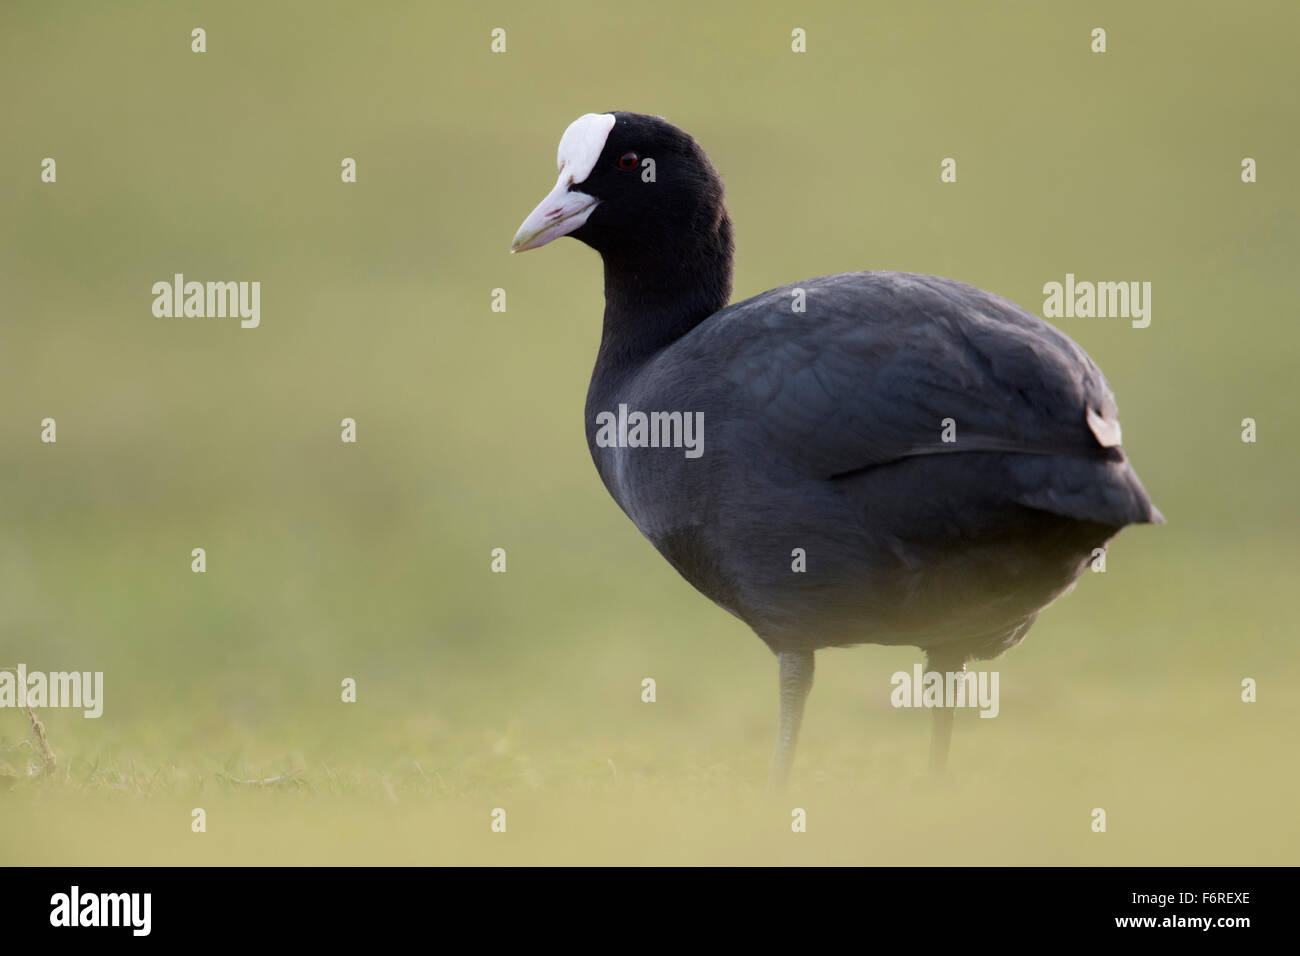 Black Coot / Coot / Eurasian Coot / Blässralle ( Fulica atra ) stands on grassland in soft atmosphere, bokeh. Stock Photo